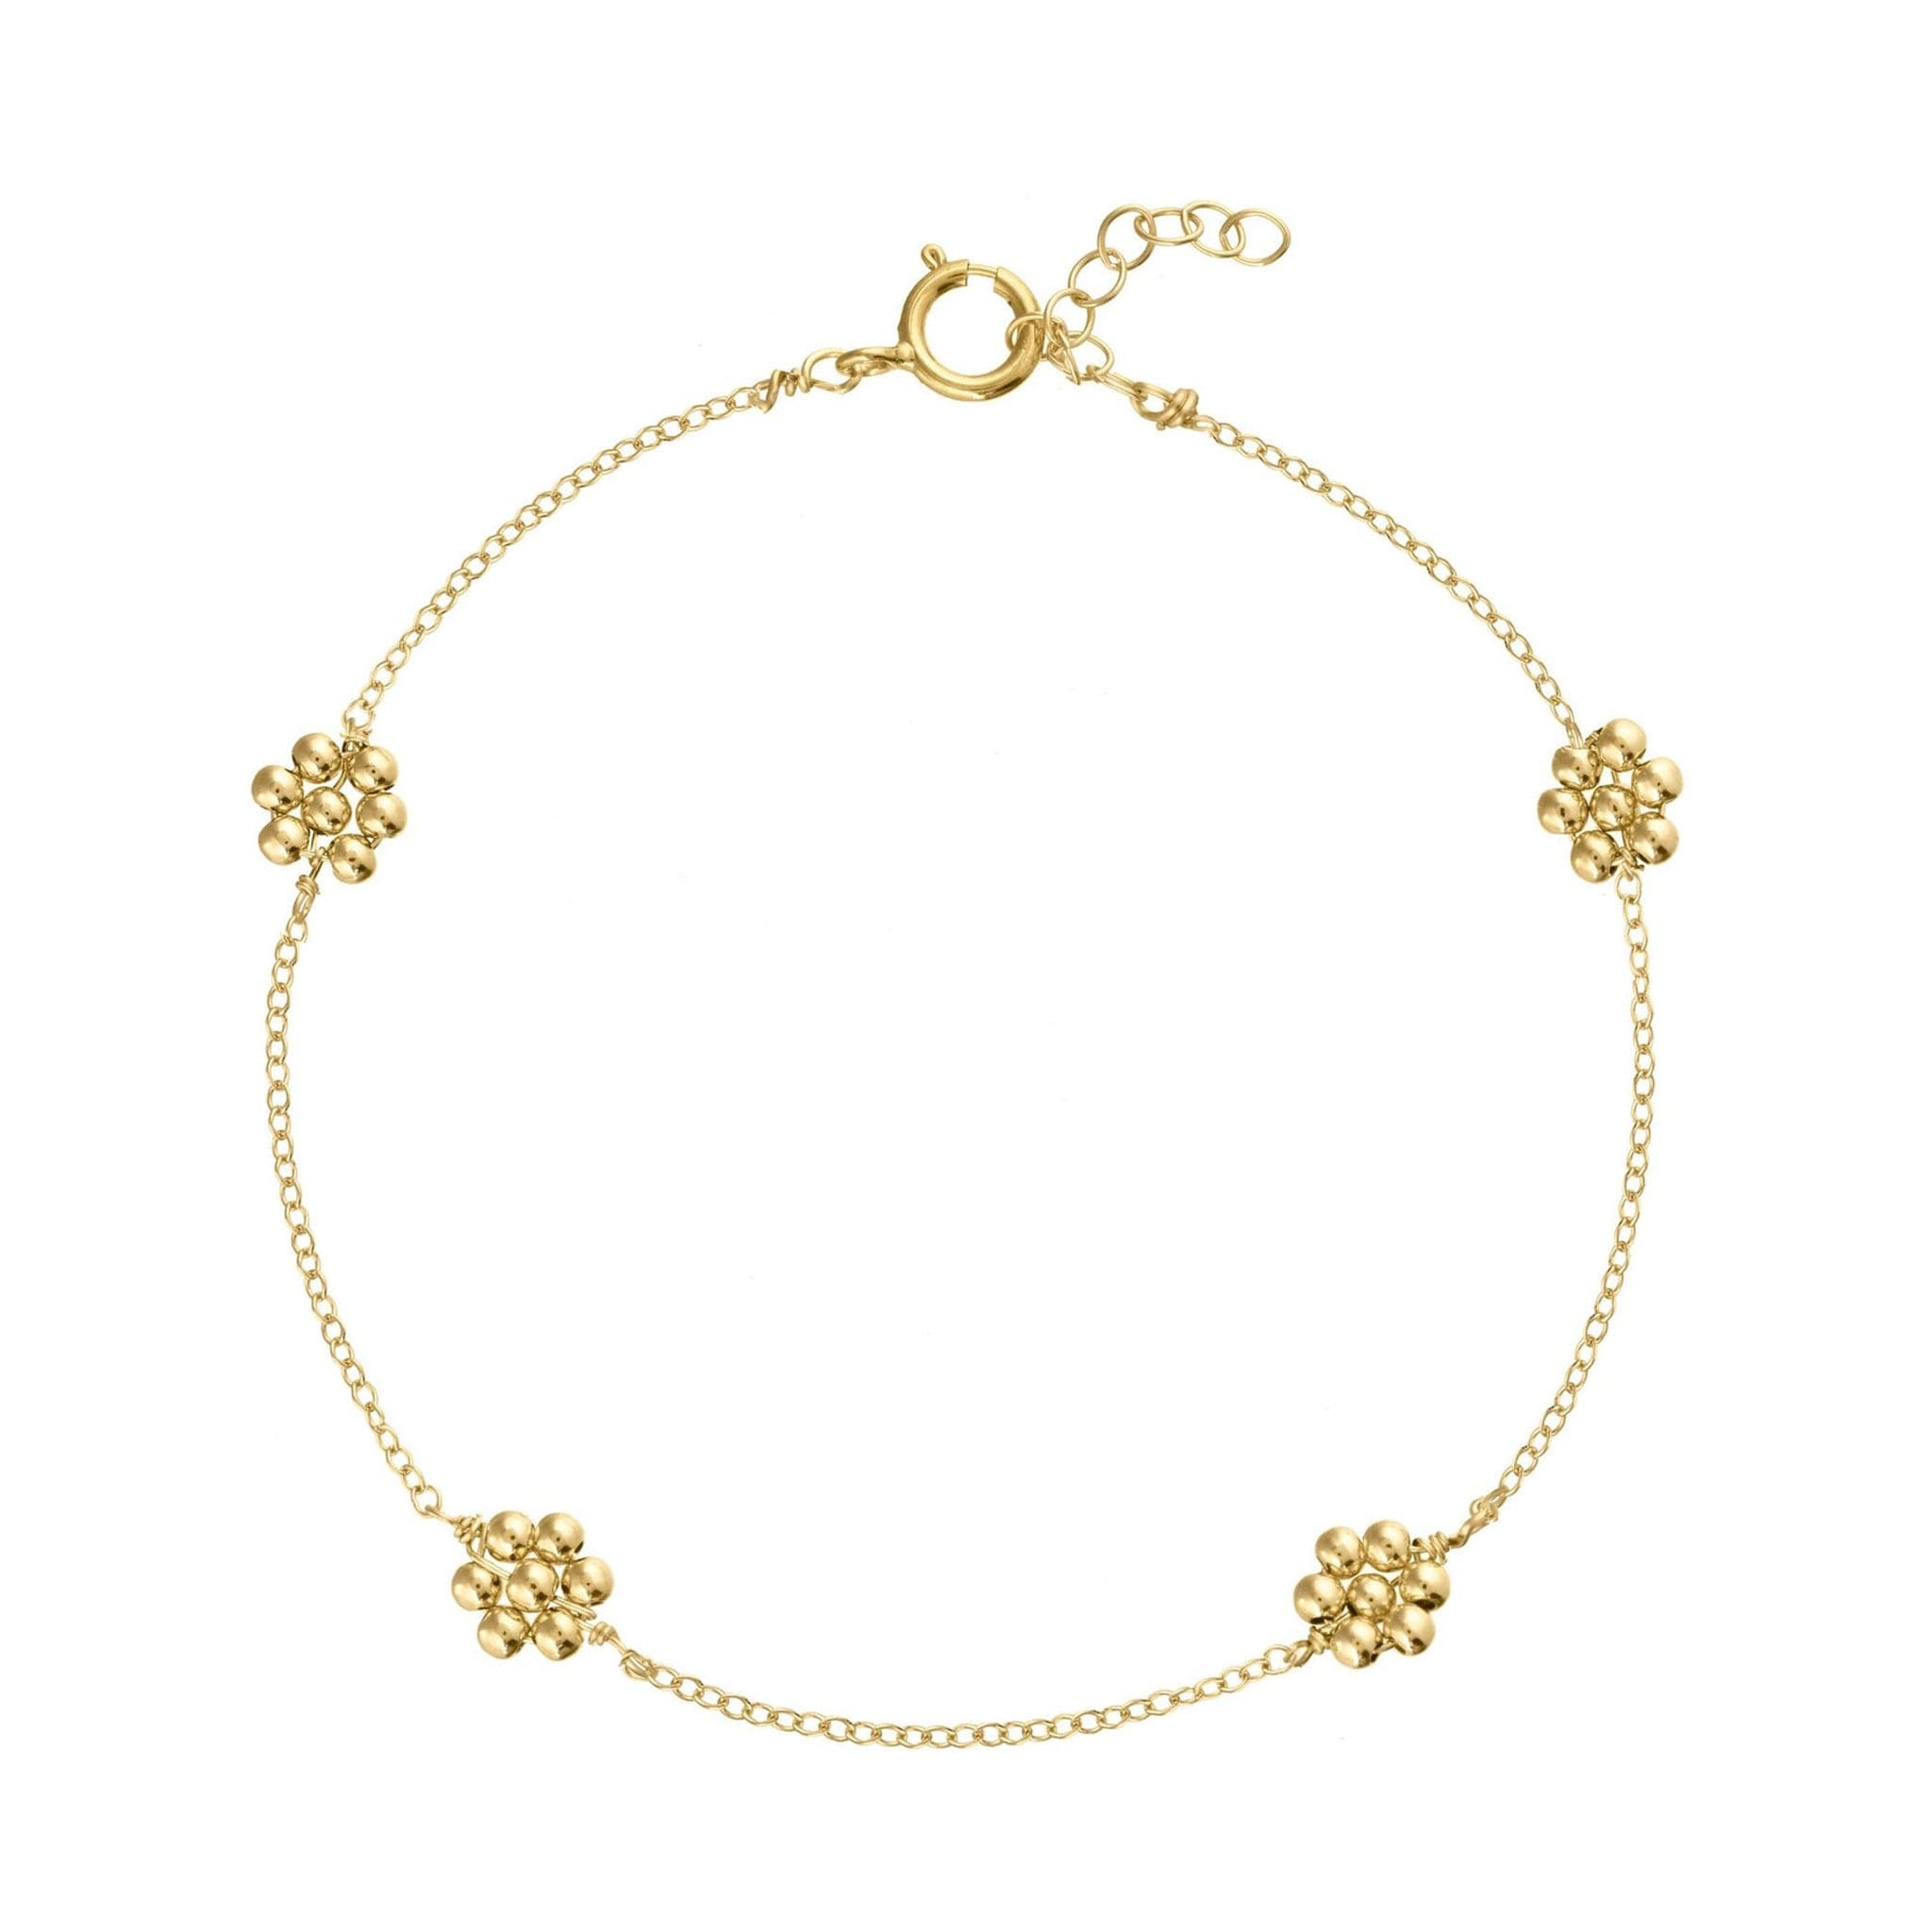 A dainty gold chain bracelet with four gold beaded daisies evenly placed on the chain.